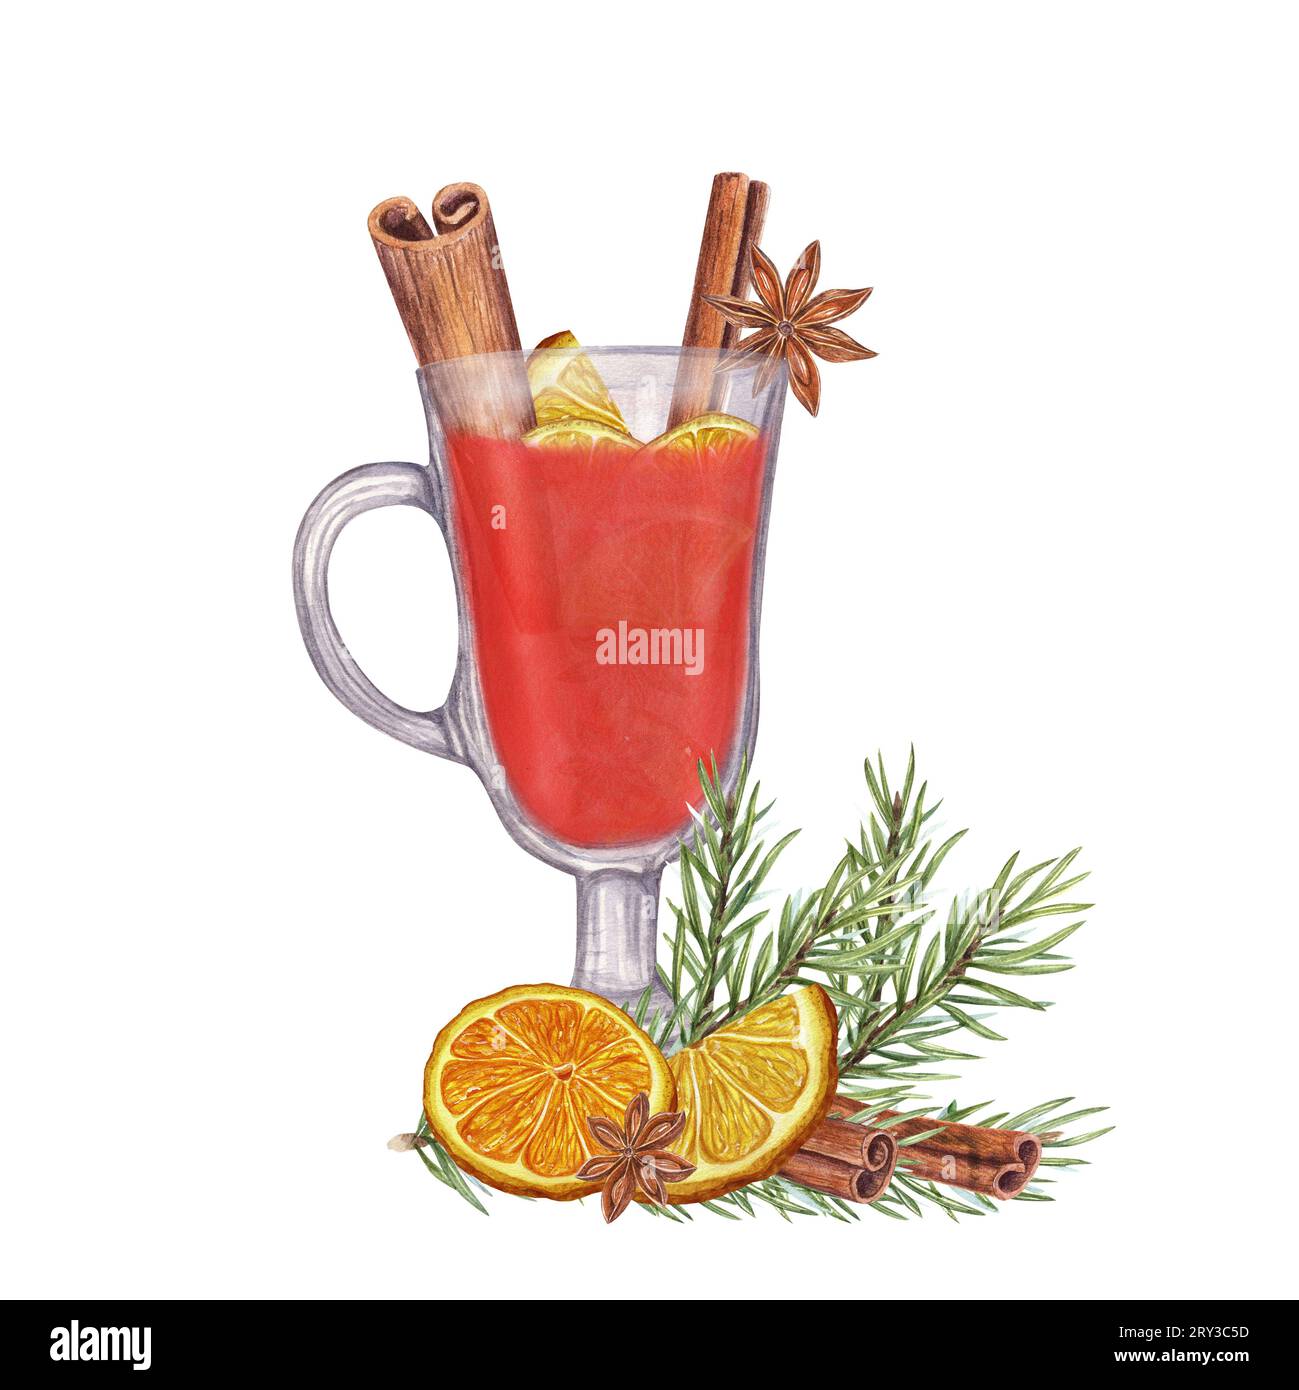 Winter beverage, Christmas Spices. Hot spicy punch. Spruce branch, dried orange slices. Mulled red wine with cinnamon sticks, star anise, orange. Stock Photo